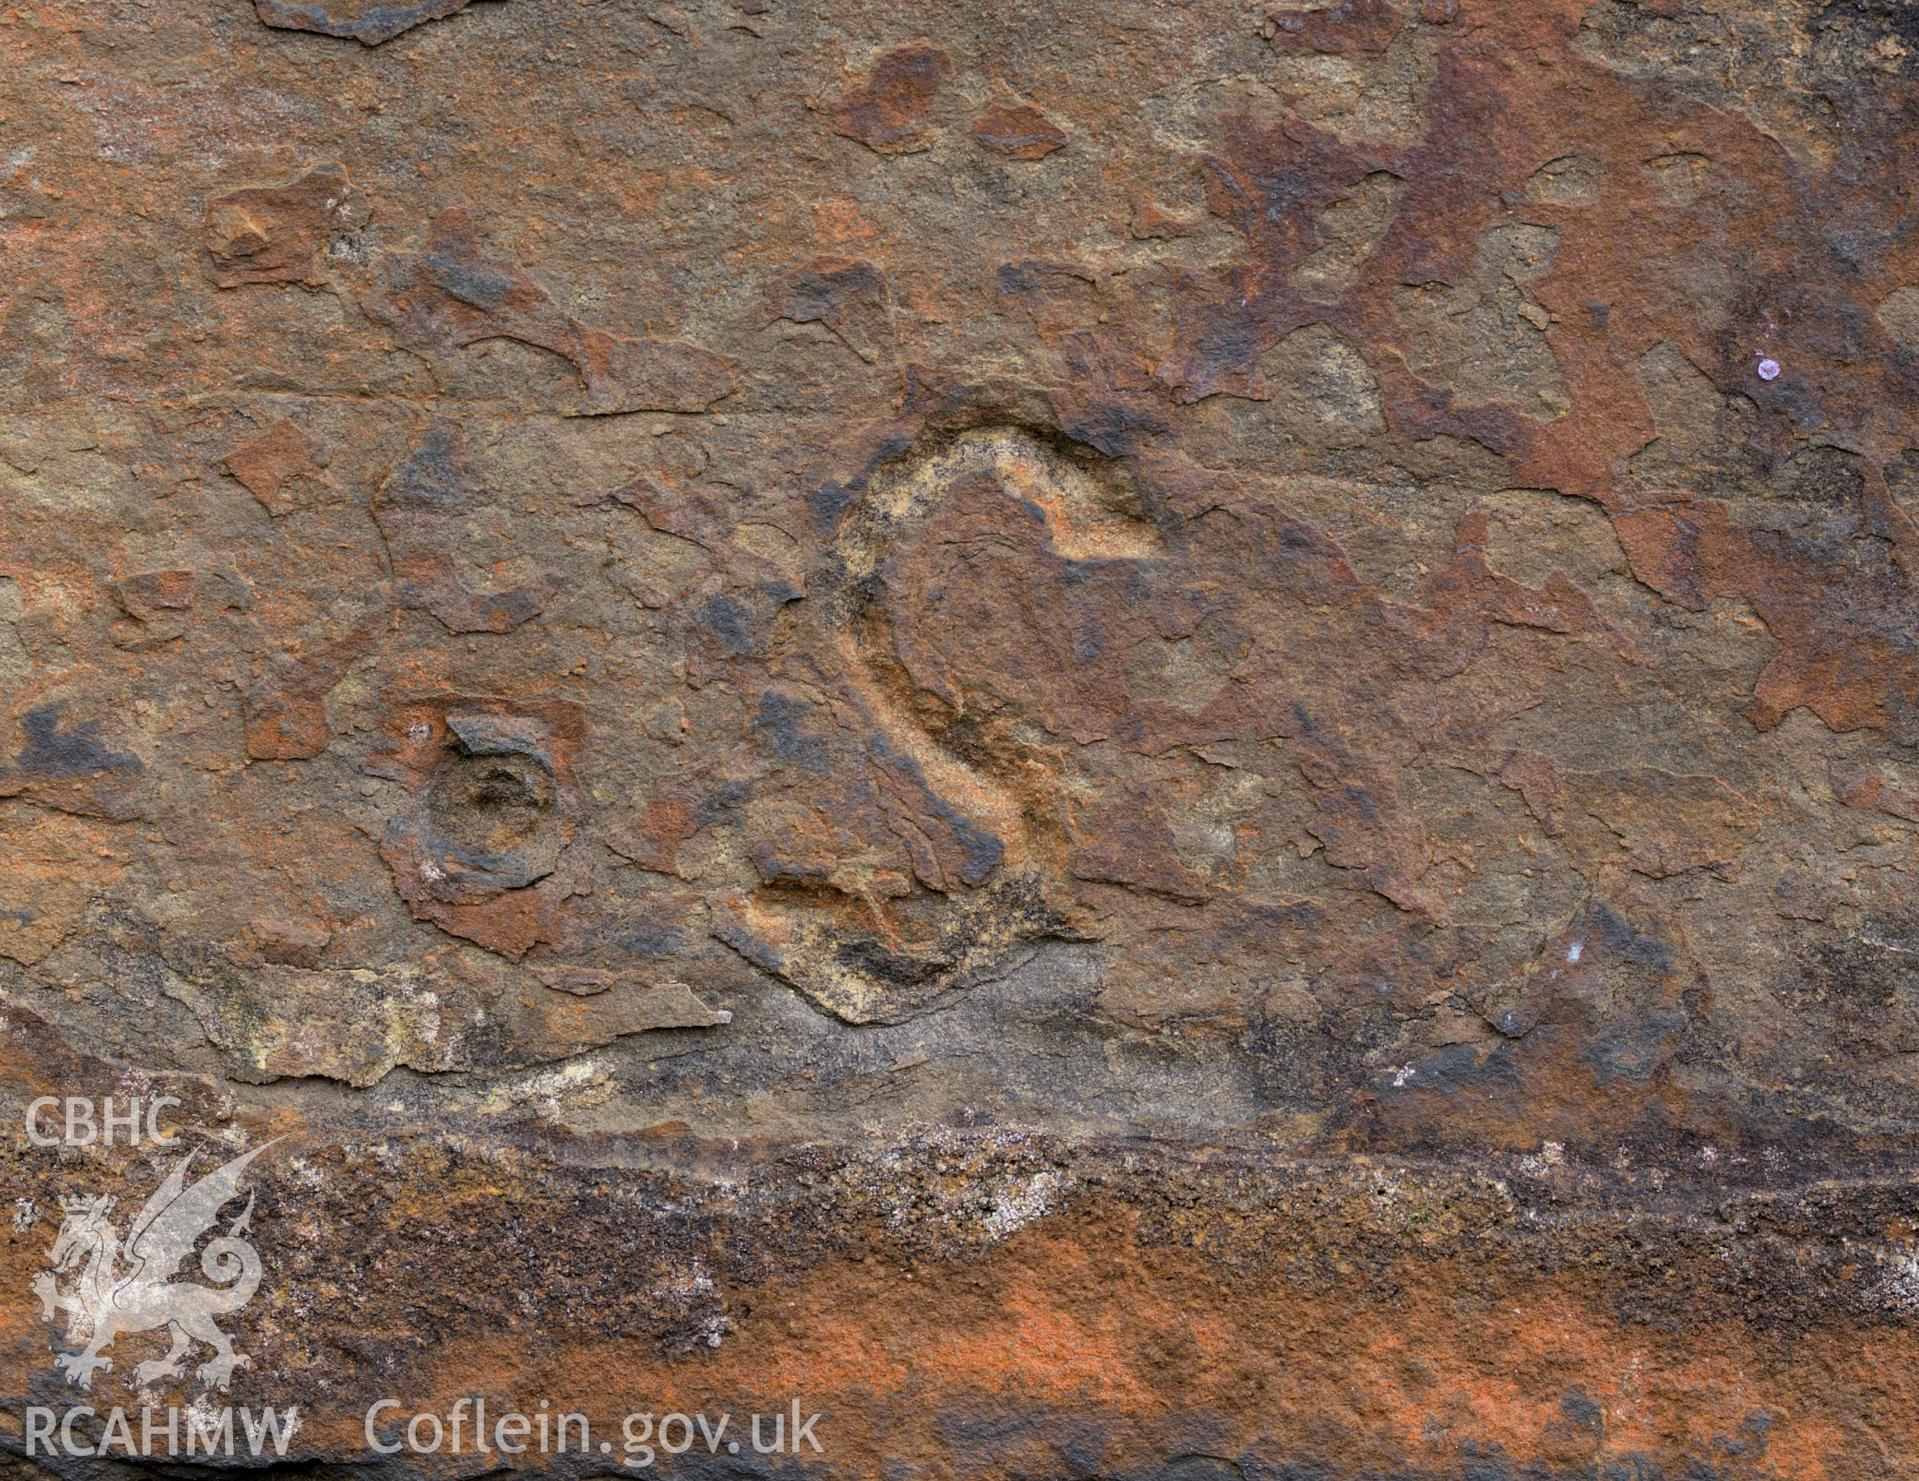 Colour photo showing mason's marks on the stone piers of the viaduct, taken by Mark Evans, January 2017.